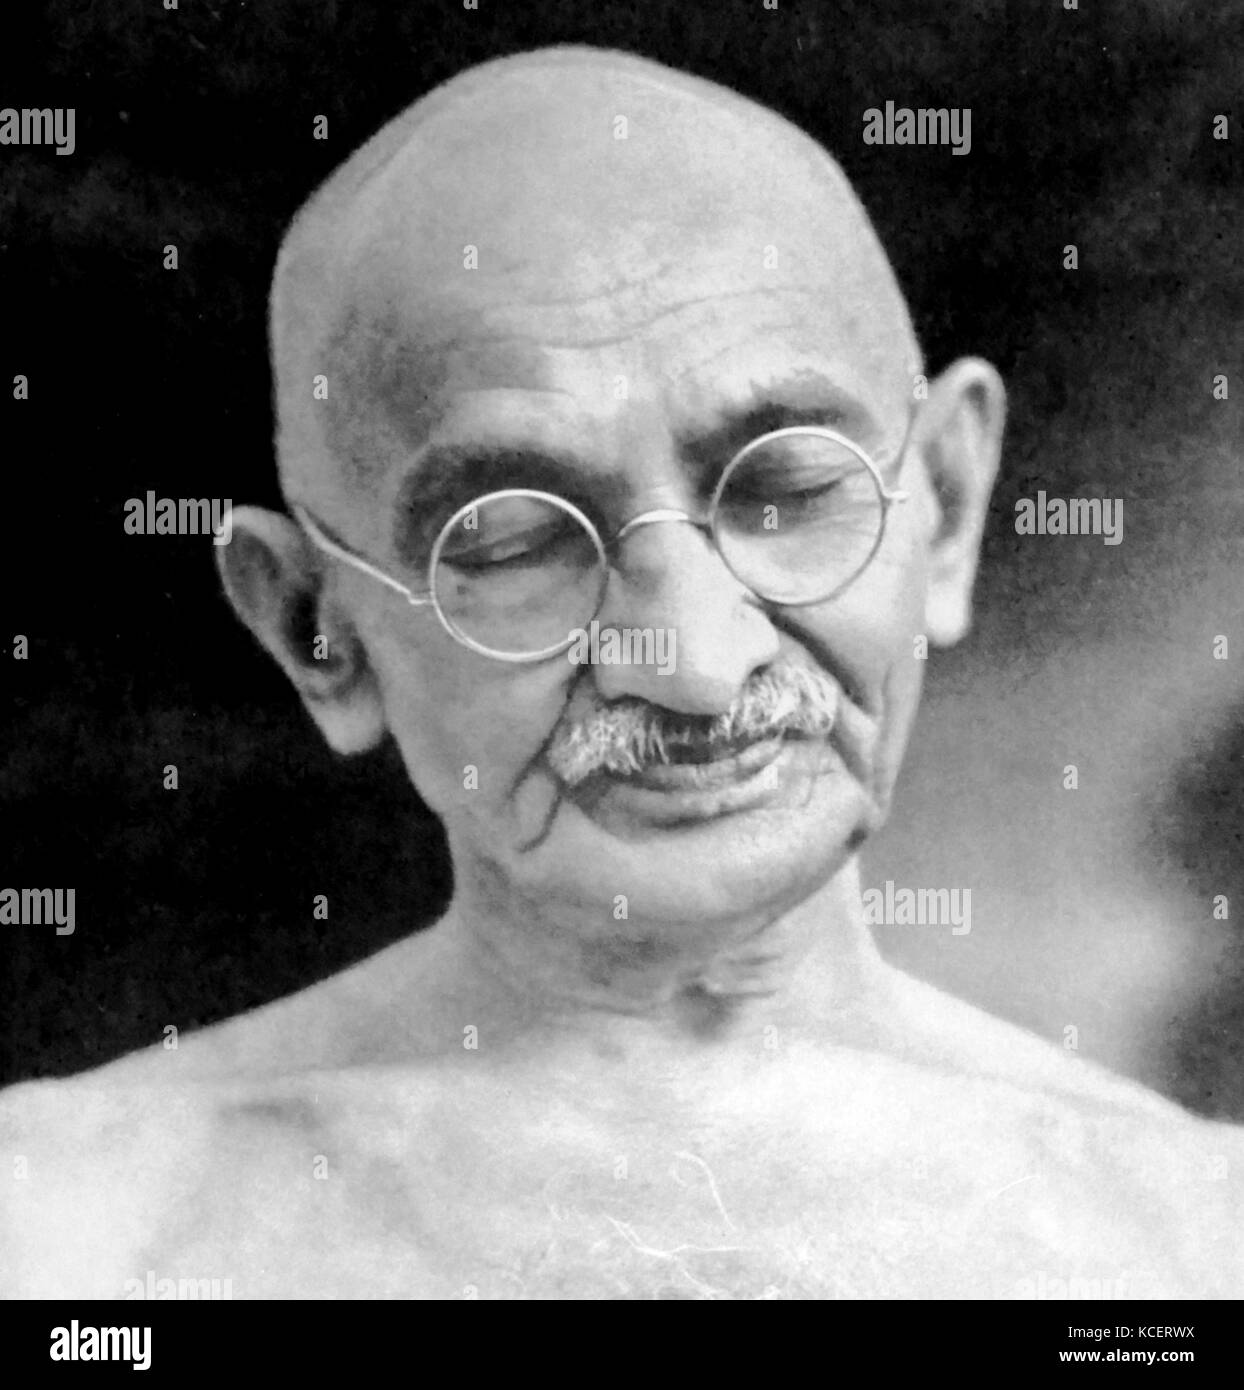 Mohandas Karamchand Gandhi (2 October 1869 – 30 January 1948). Preeminent  leader of the Indian independence movement in British-ruled India.  Employing nonviolent civil disobedience, Gandhi led India to independence  and inspired movements